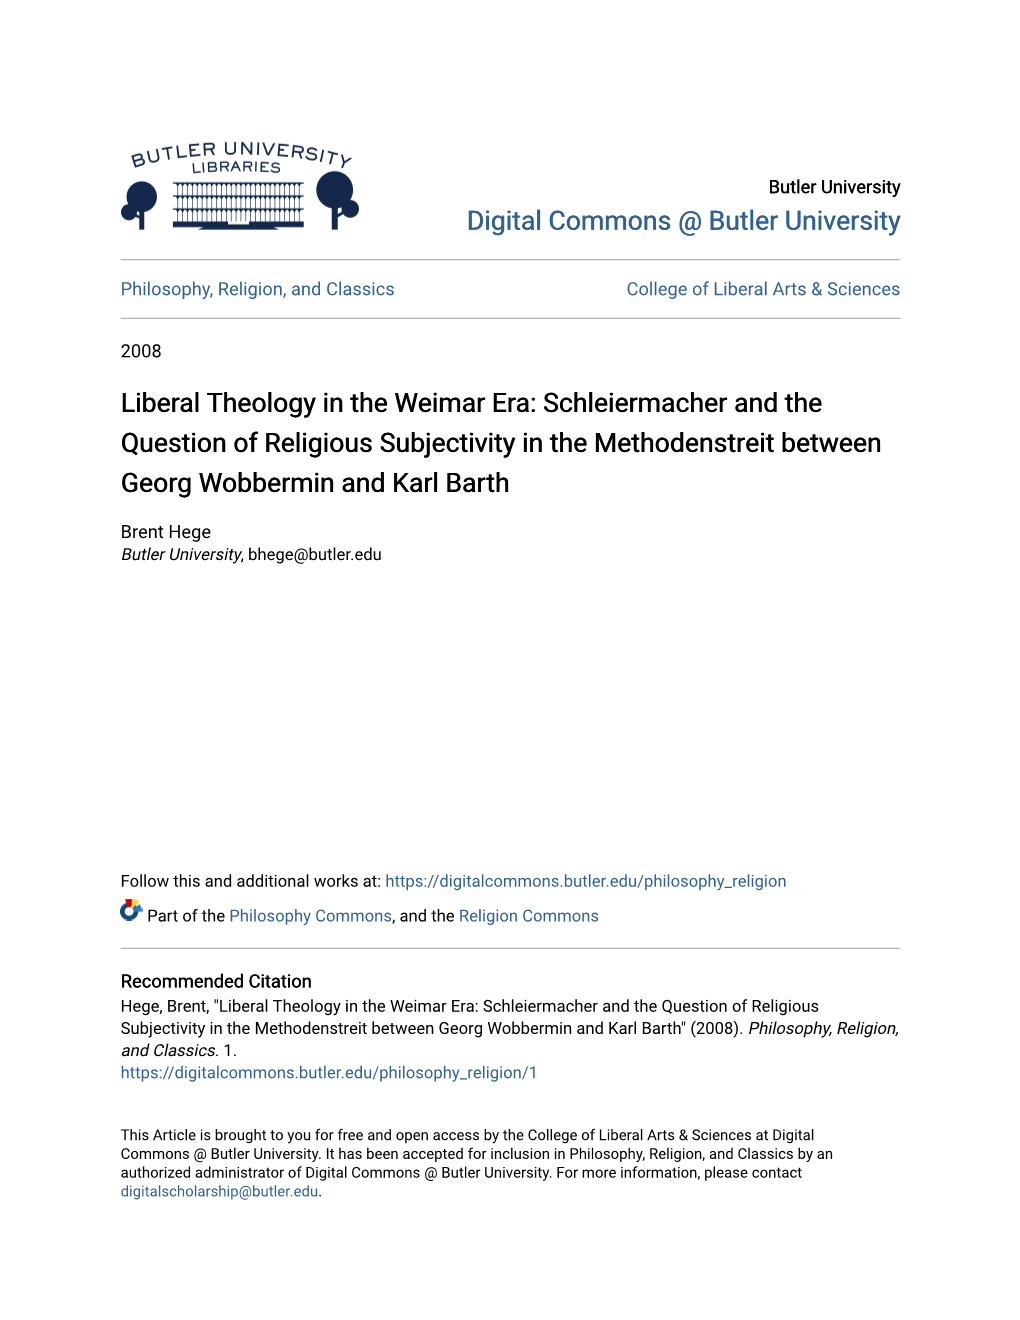 Liberal Theology in the Weimar Era: Schleiermacher and the Question of Religious Subjectivity in the Methodenstreit Between Georg Wobbermin and Karl Barth